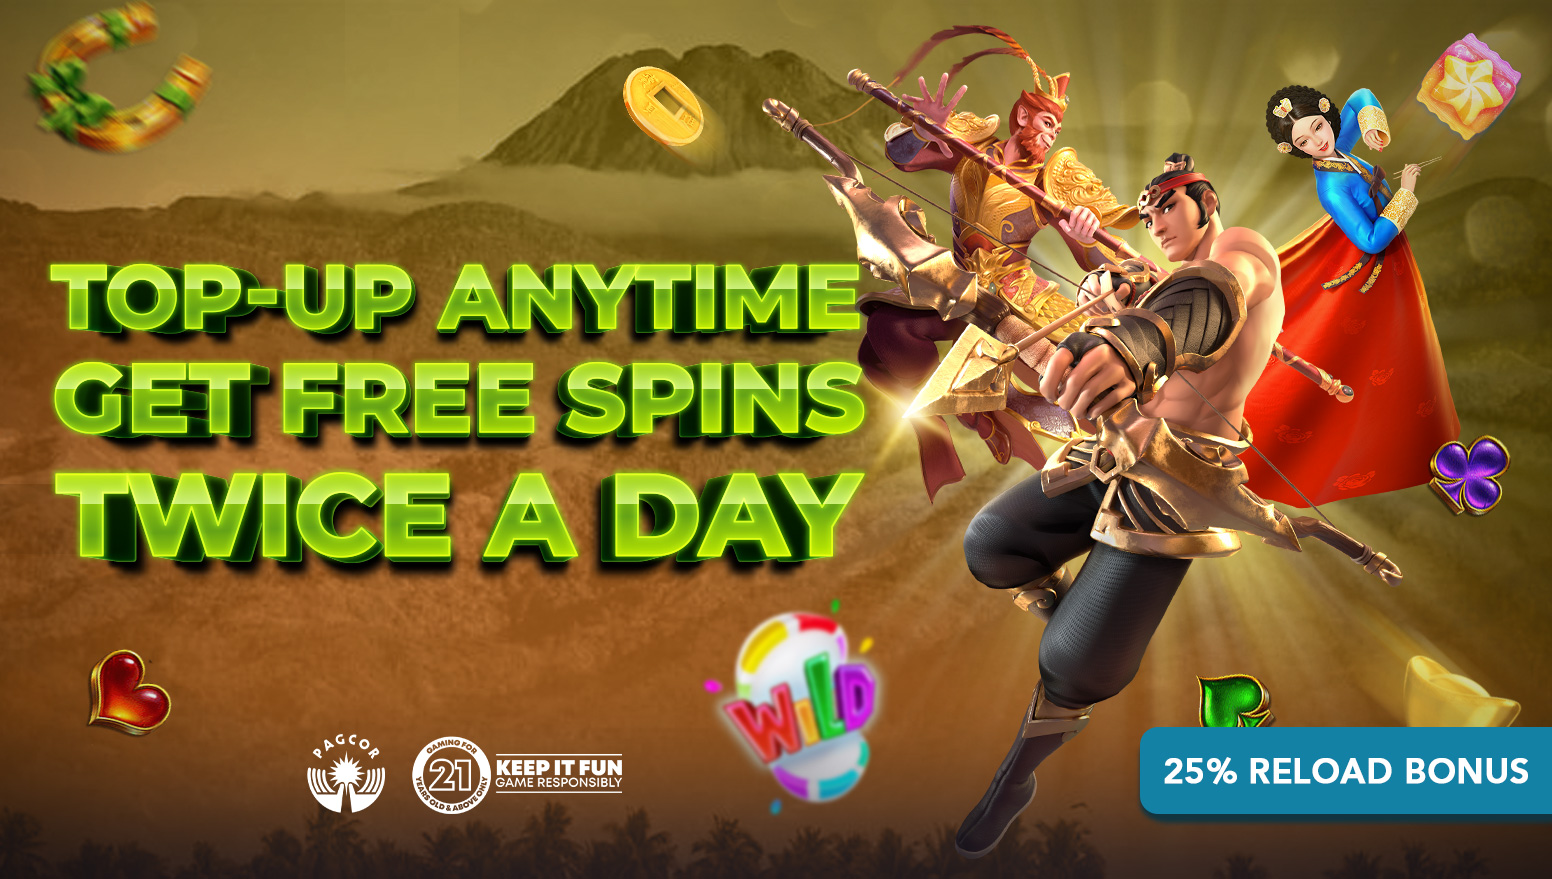 Top Up Anytime, Get Free Spins TWICE A Day